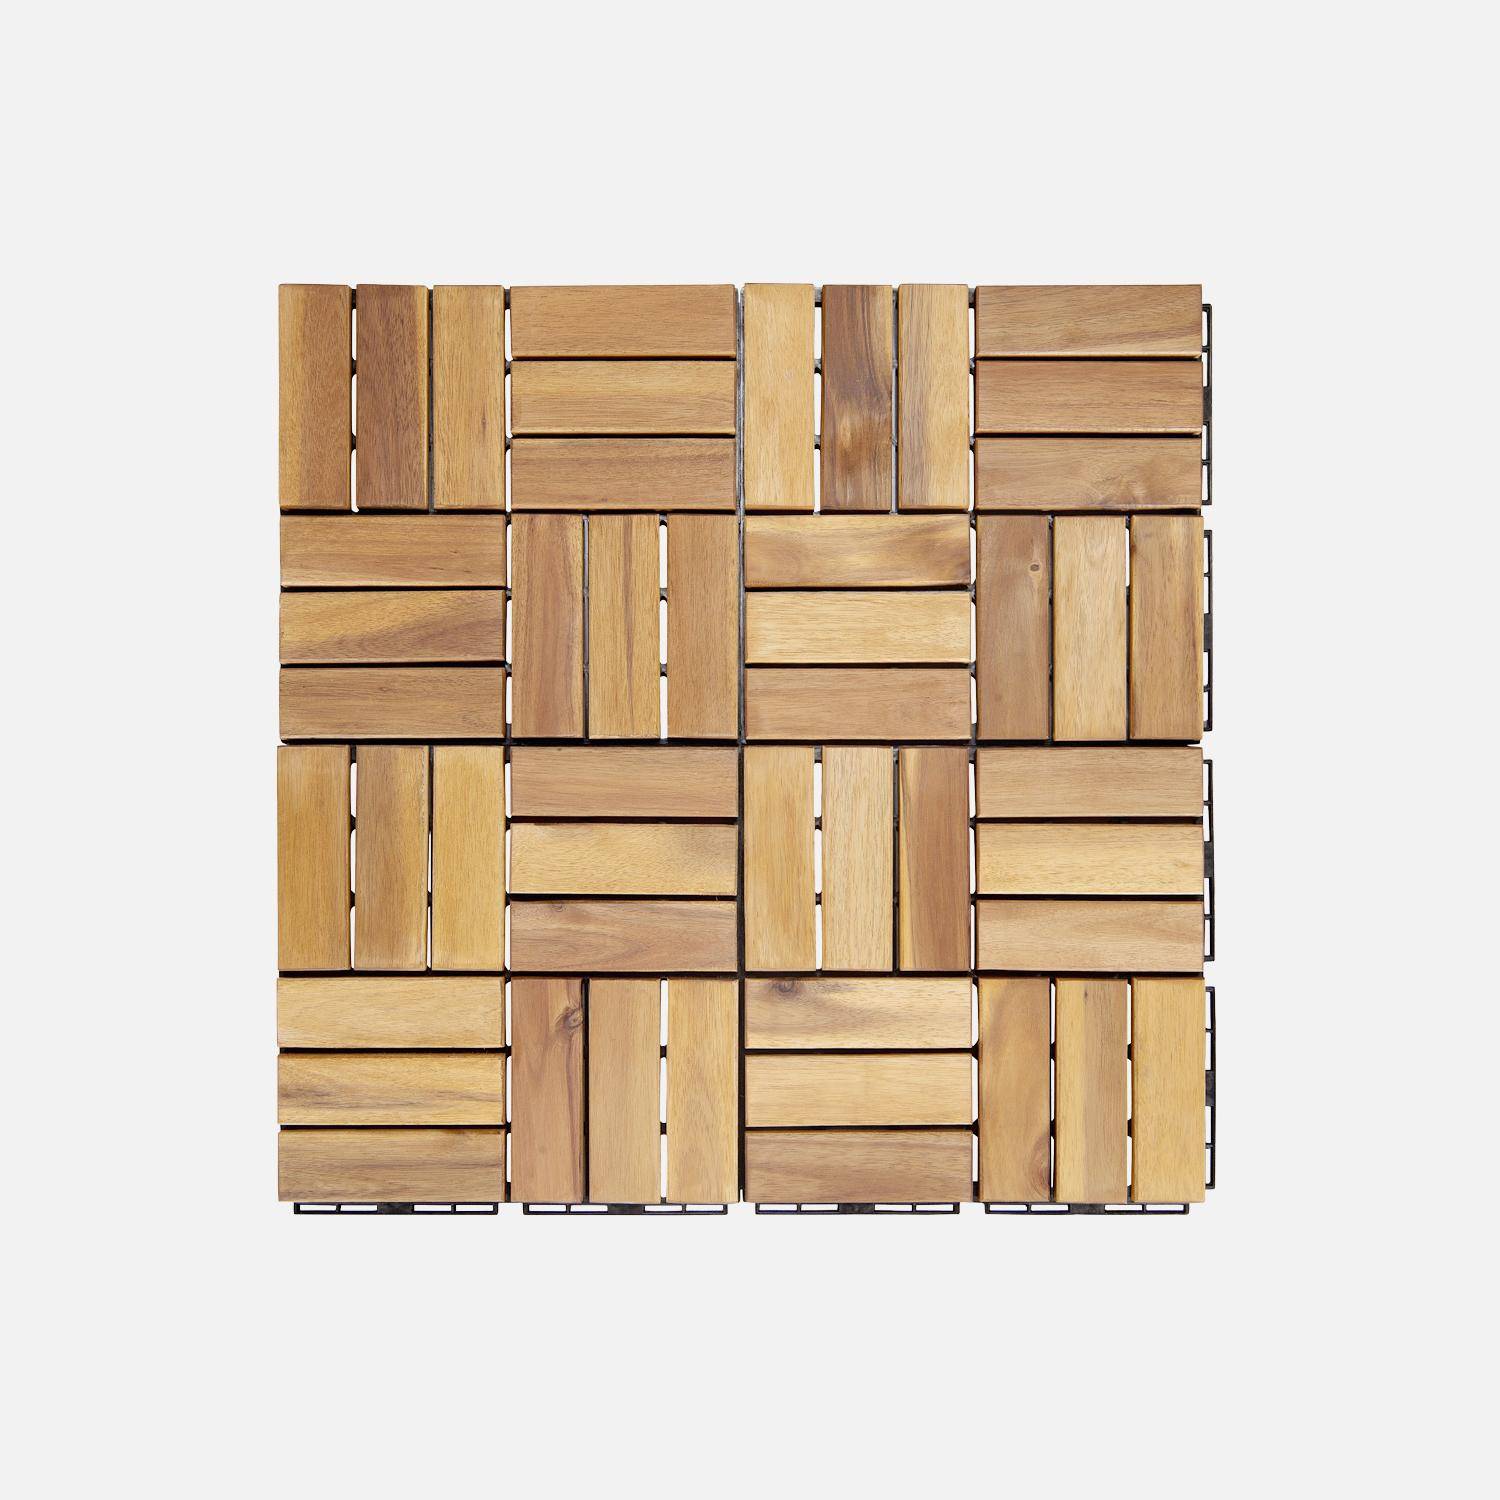 Batch of 36 acacia wood decking tiles 30x30cm, square pattern, clip-on,sweeek,Photo4